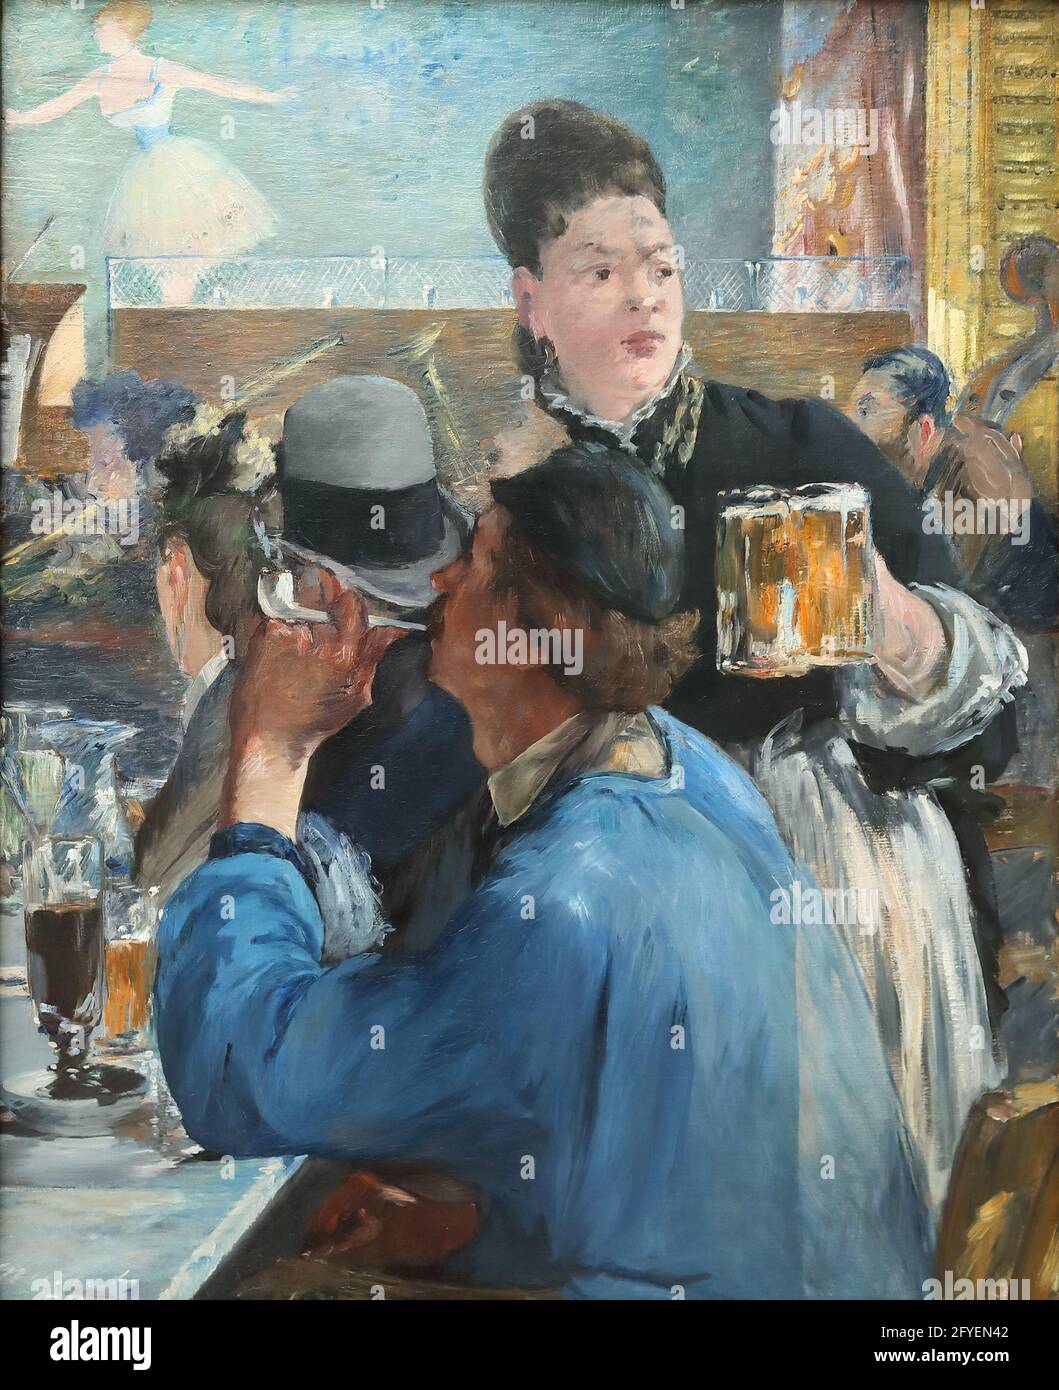 Corner of a Cafe-Concert by French Impressionist Edouard Manet at the National Gallery, London, UK Stock Photo